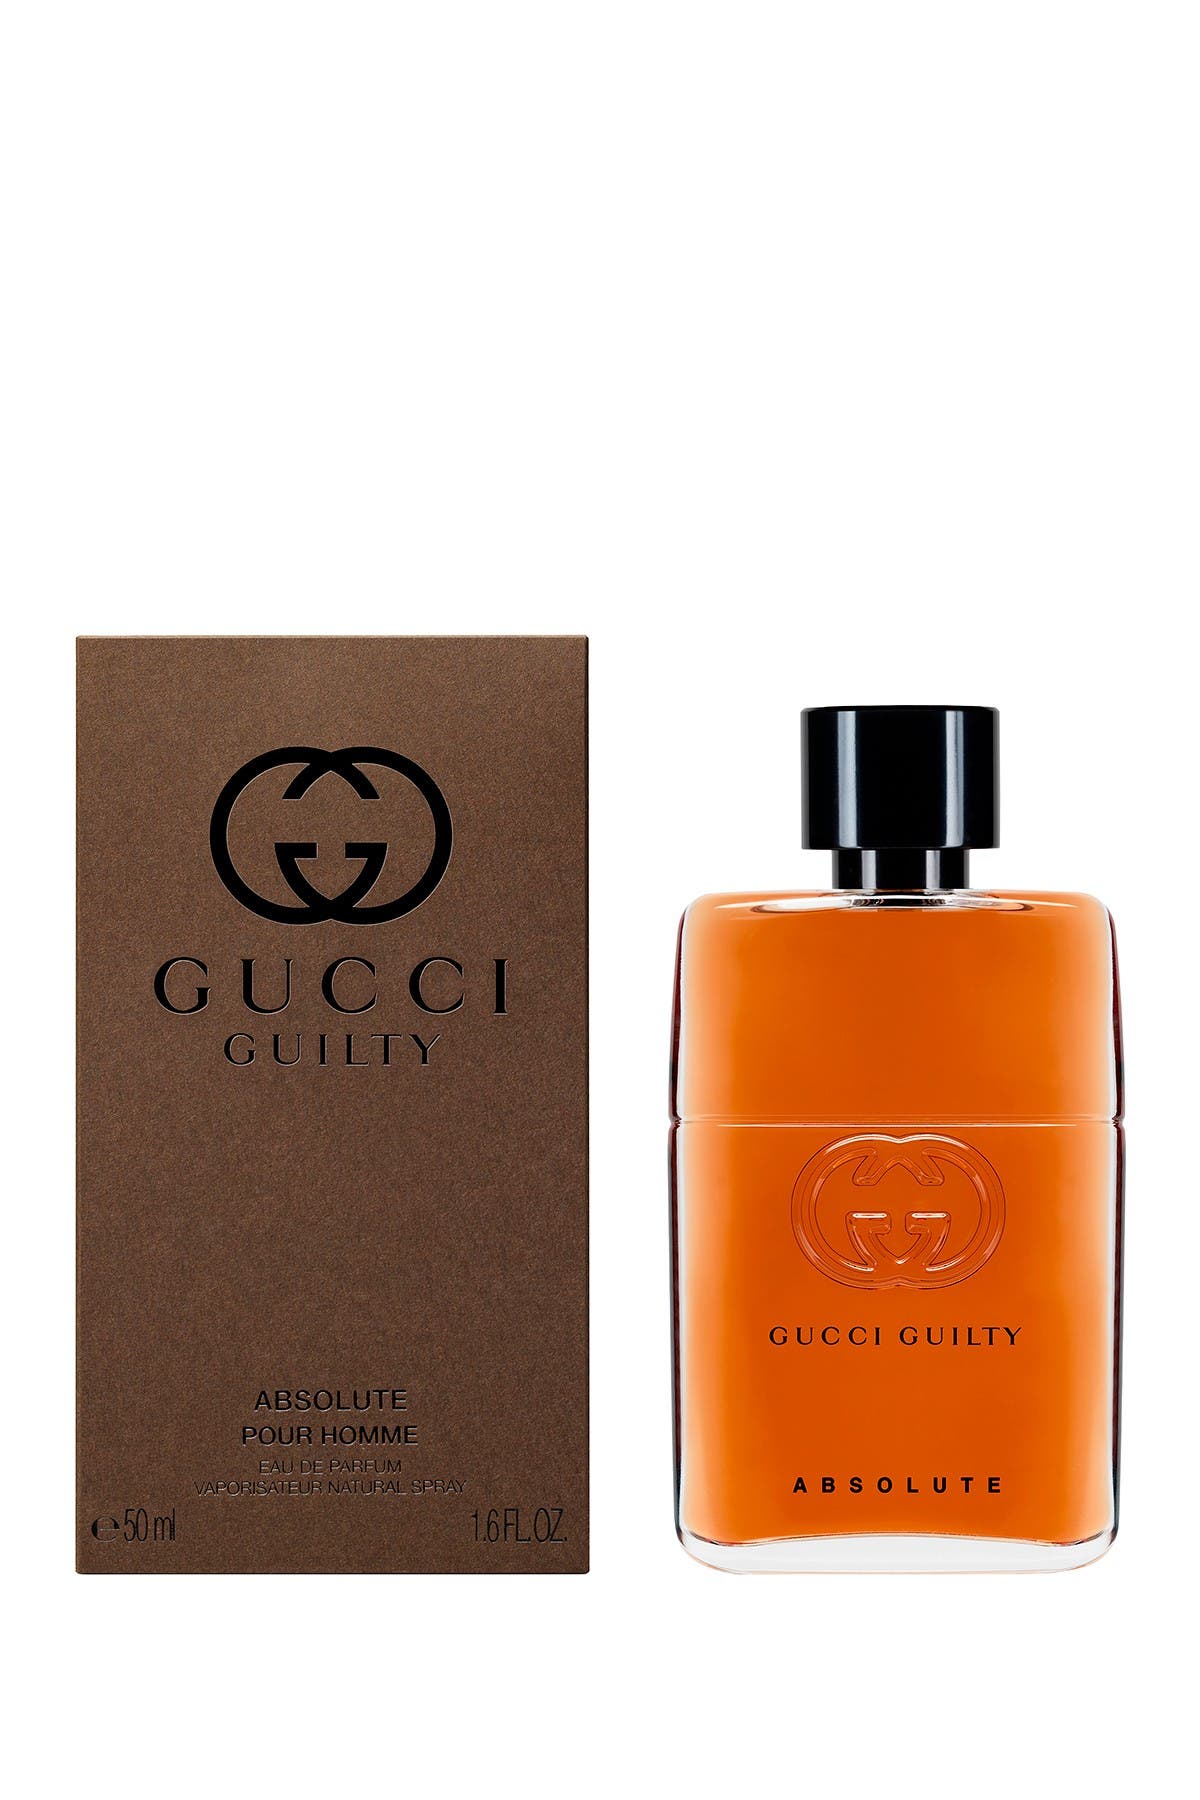 GUCCI | Guilty Absolute Pour Homme - 1 